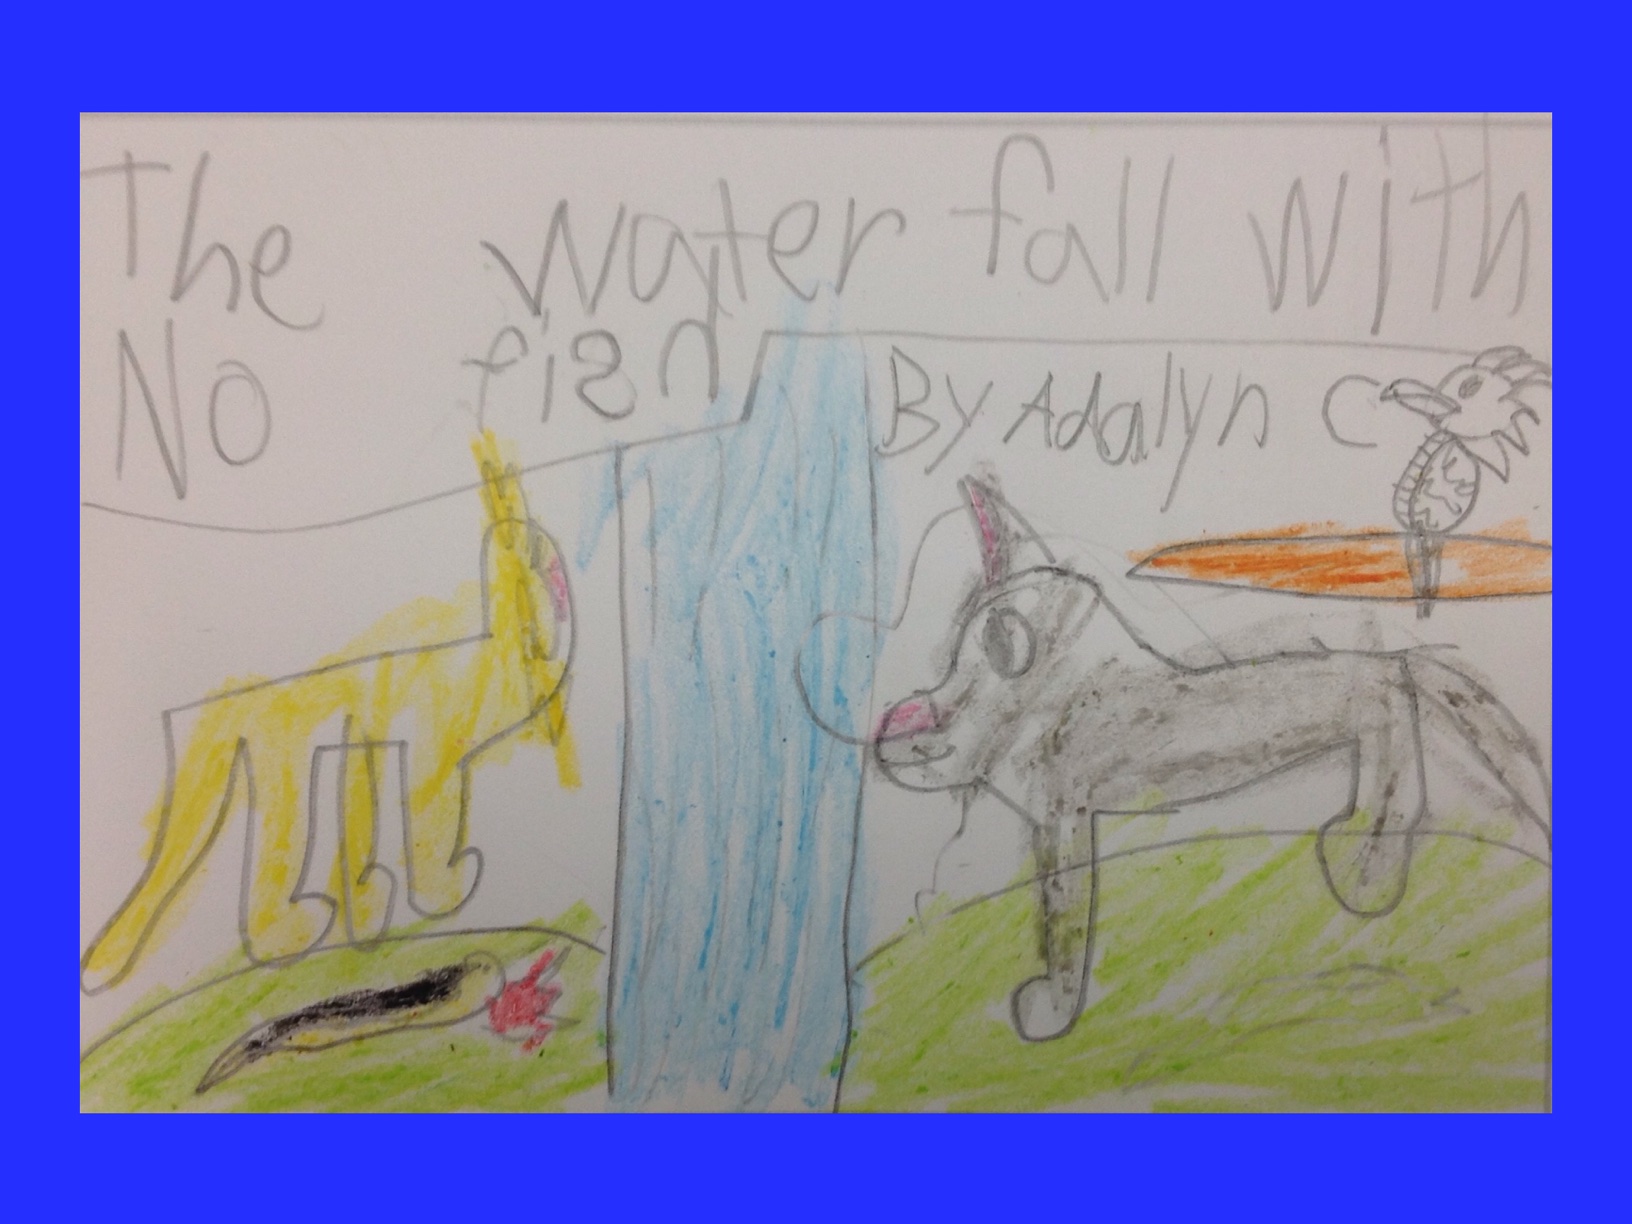 The Waterfall with No Fish by Adalyn C